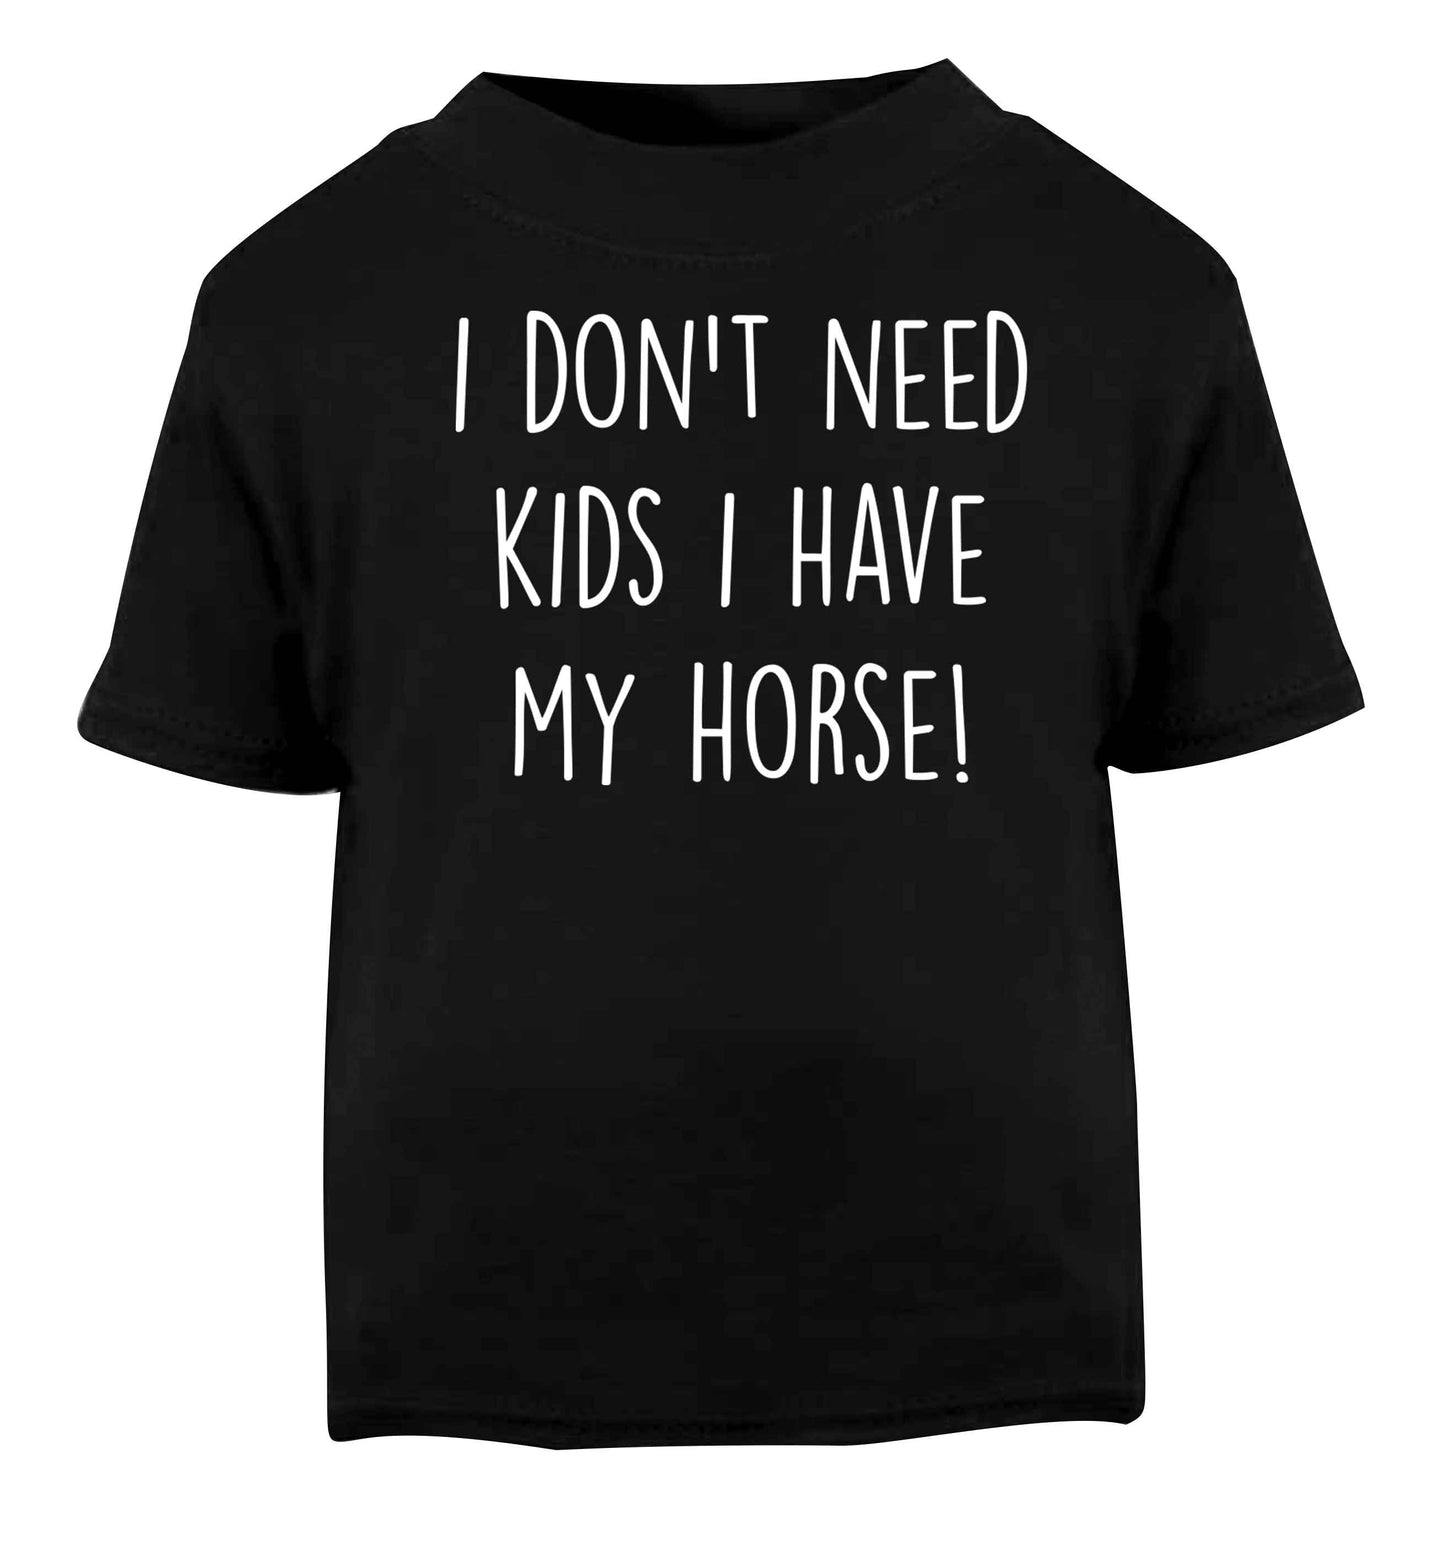 I don't need kids I have my horse Black baby toddler Tshirt 2 years